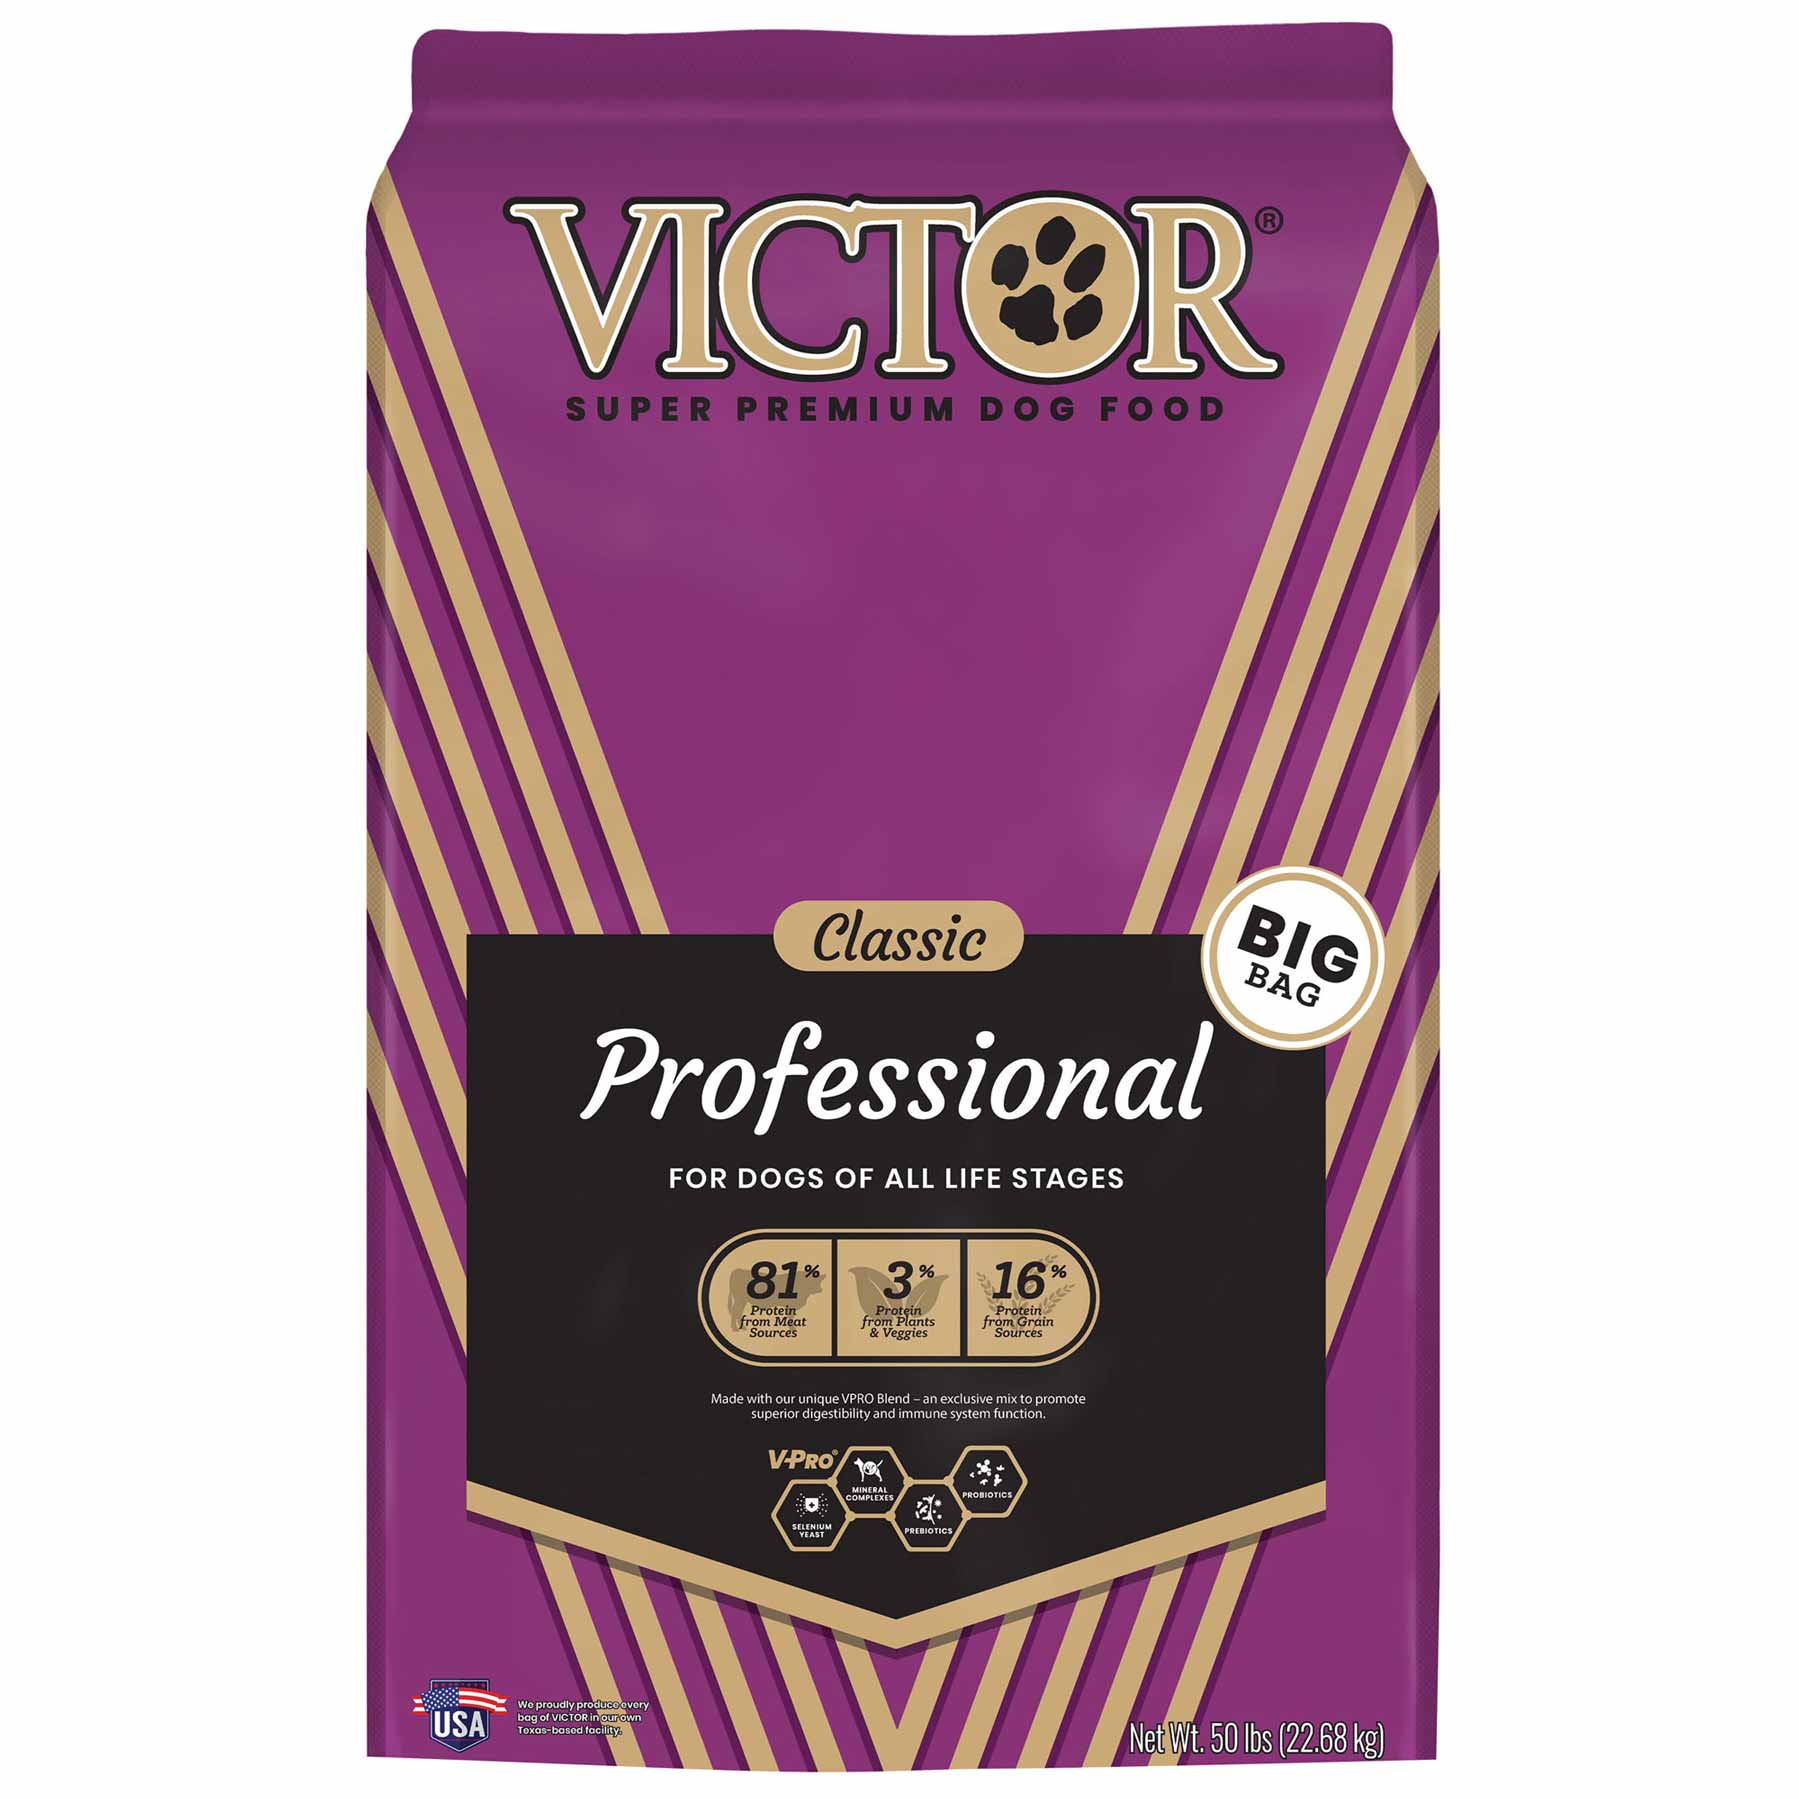 VICTOR Classic Professional, Dry Dog Food, 50 Pounds